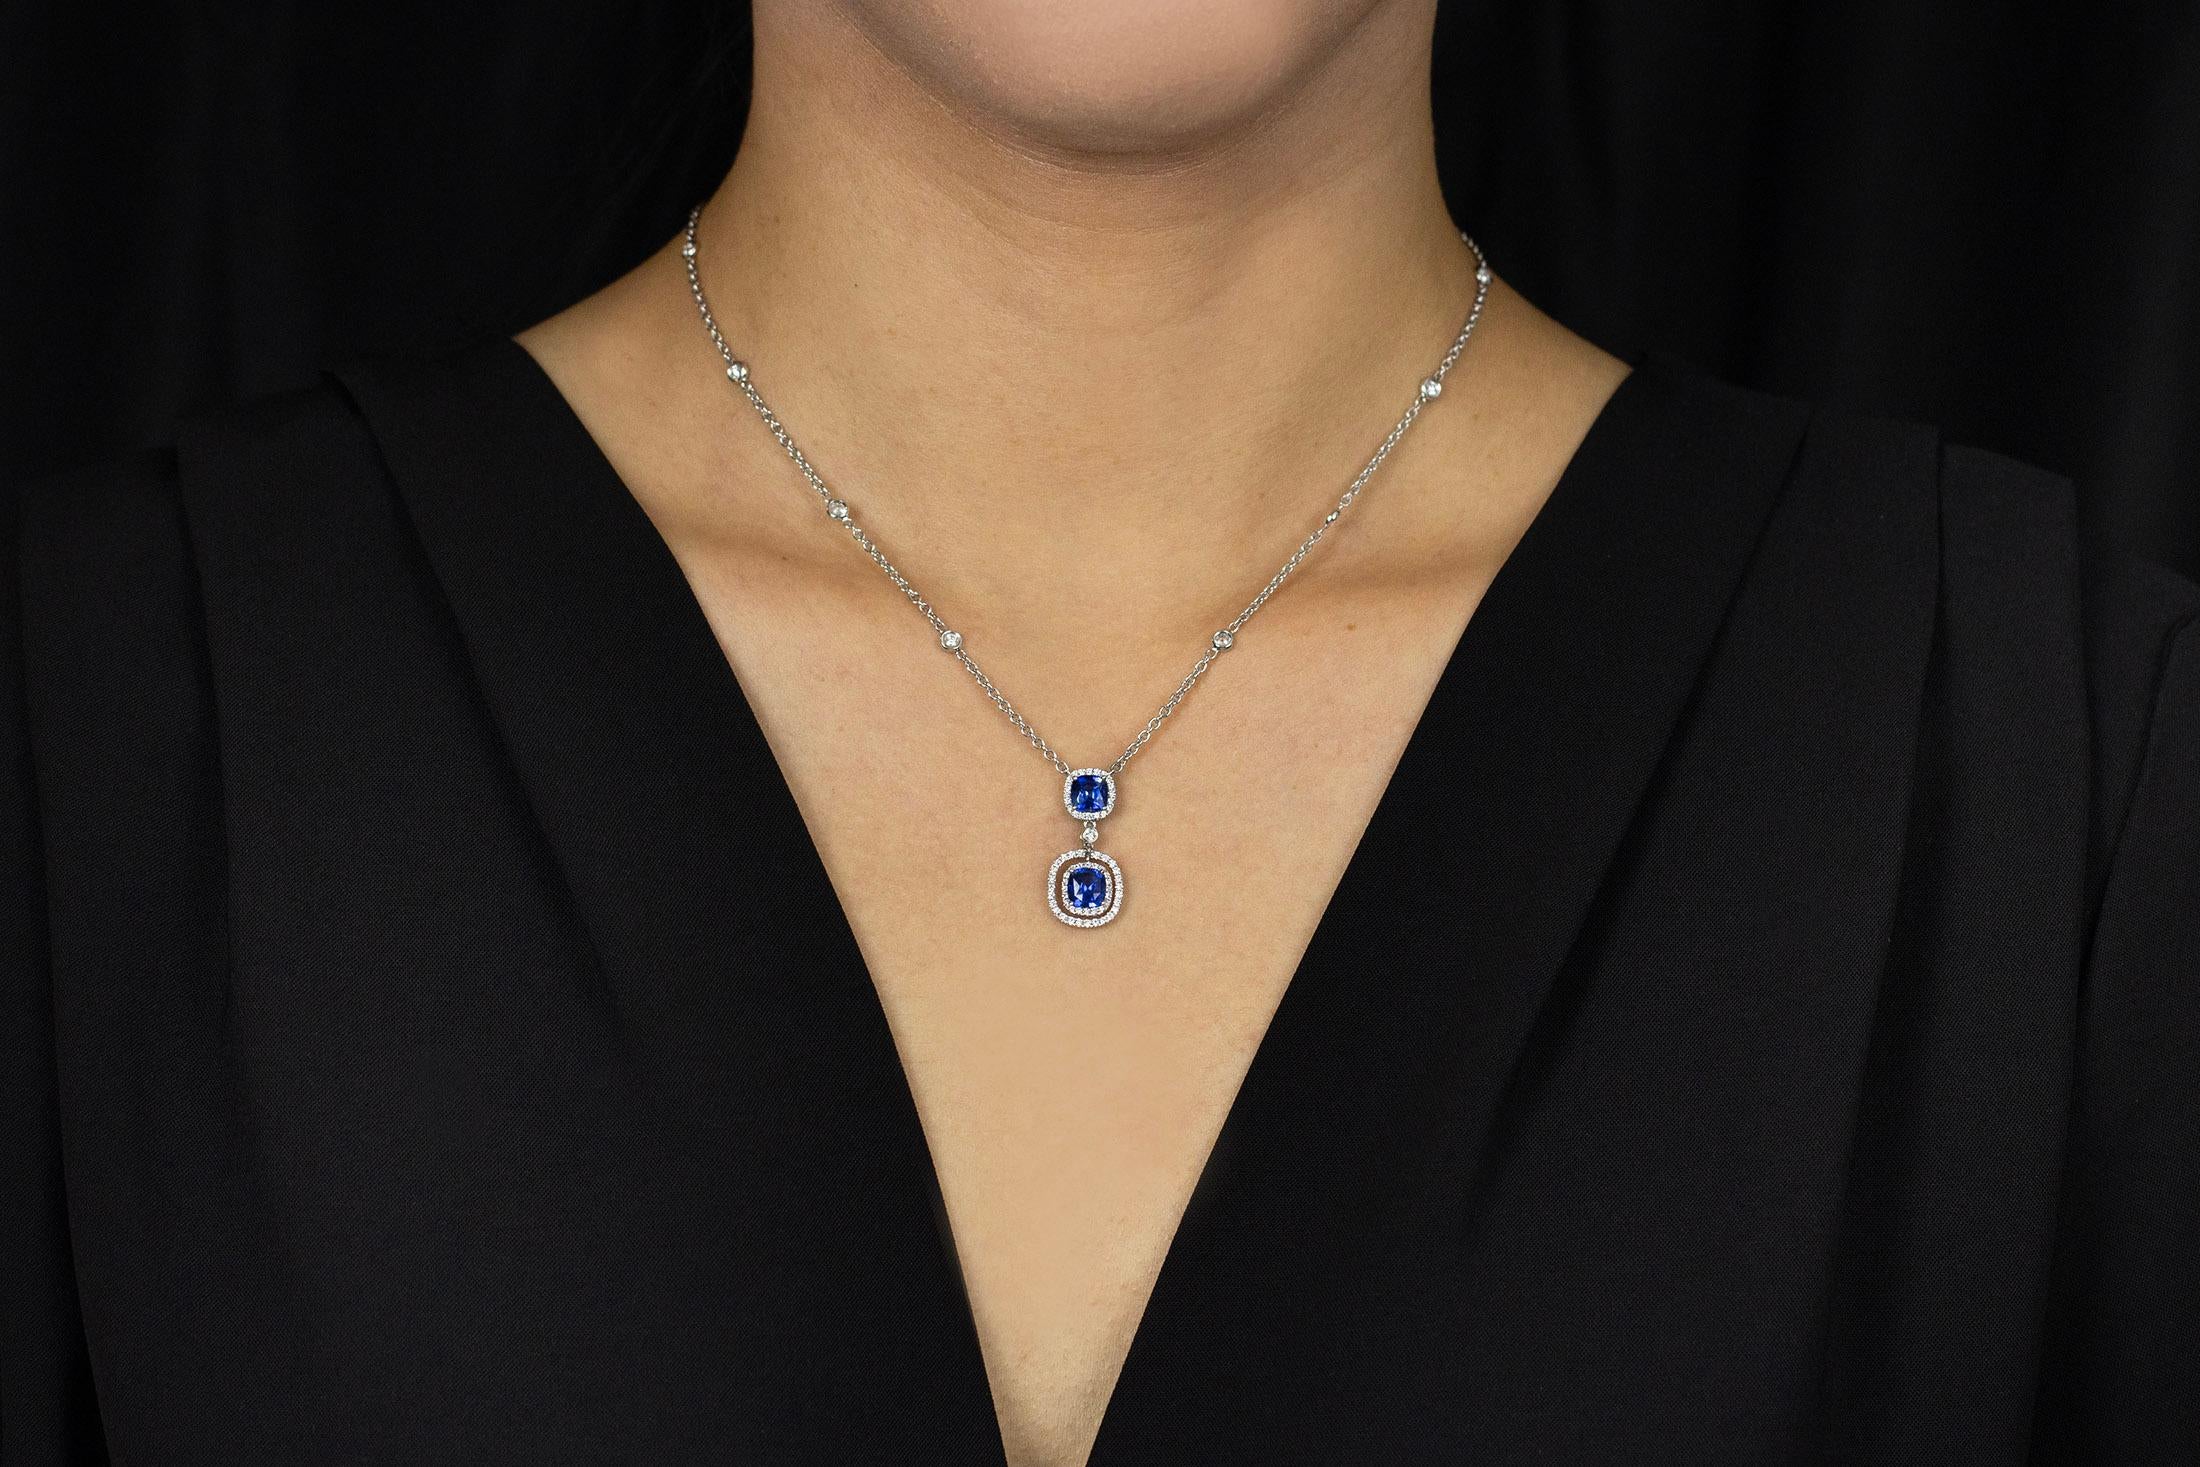 An elegant pendant necklace showcasing two cushion cut blue sapphire weighing 2.20 carats total. Each blue sapphire is surrounded by a row of brilliant round diamonds in a halo design weighing 0.75 carats total, and a bezel set round diamond spaced